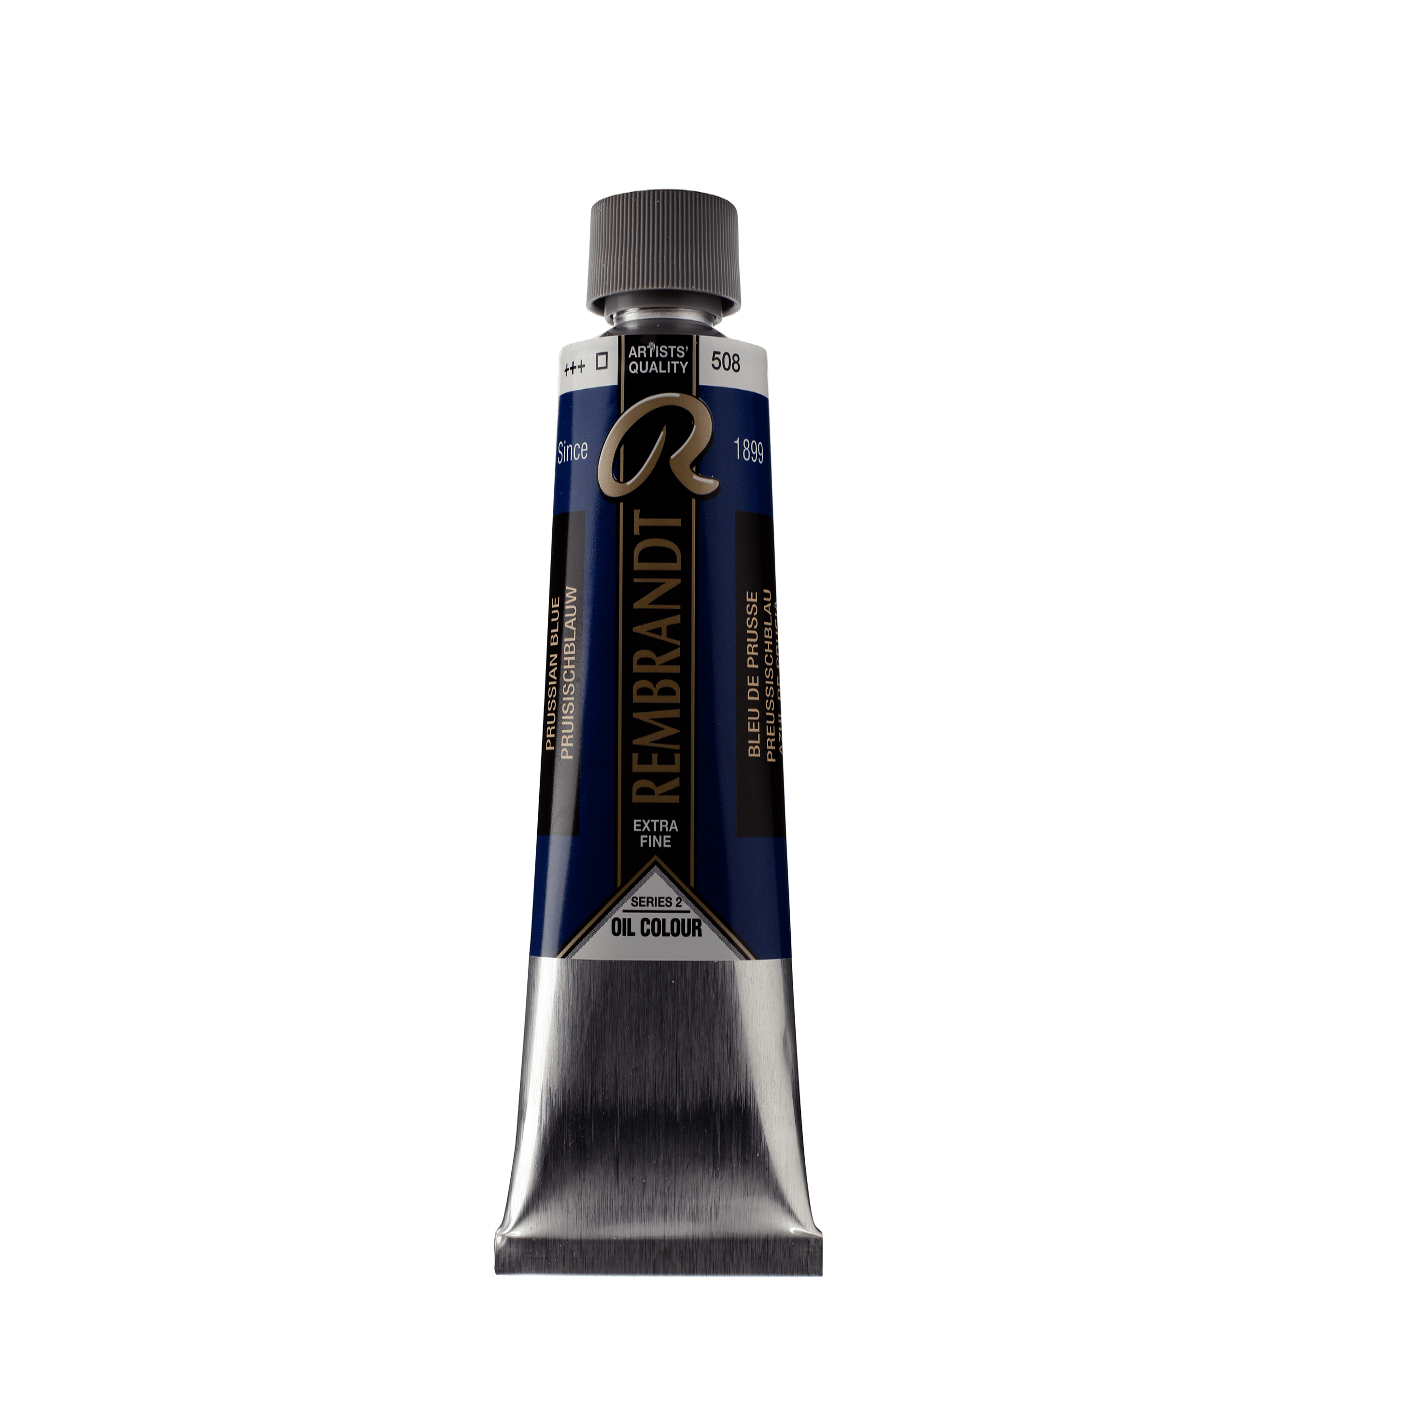 Rembrandt Oliemaling 150ml Prussian Blue